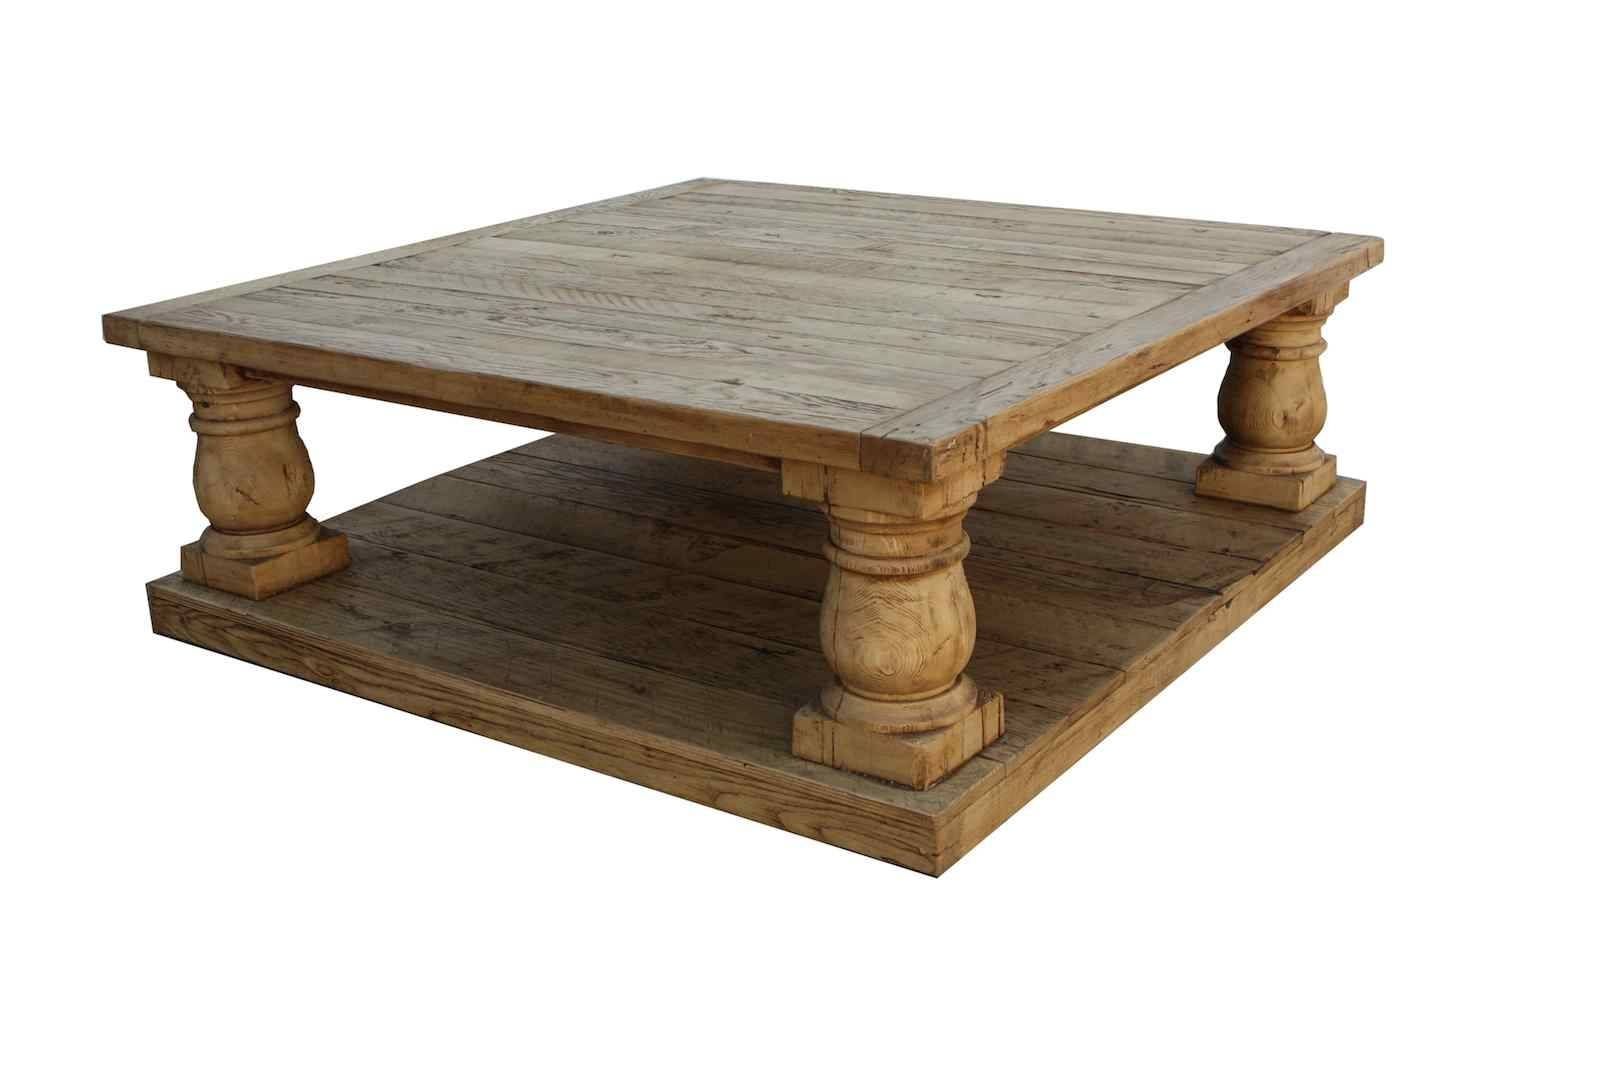 Classy Big Wooden Coffee Table In Home Design Ideas (View 18 of 30)